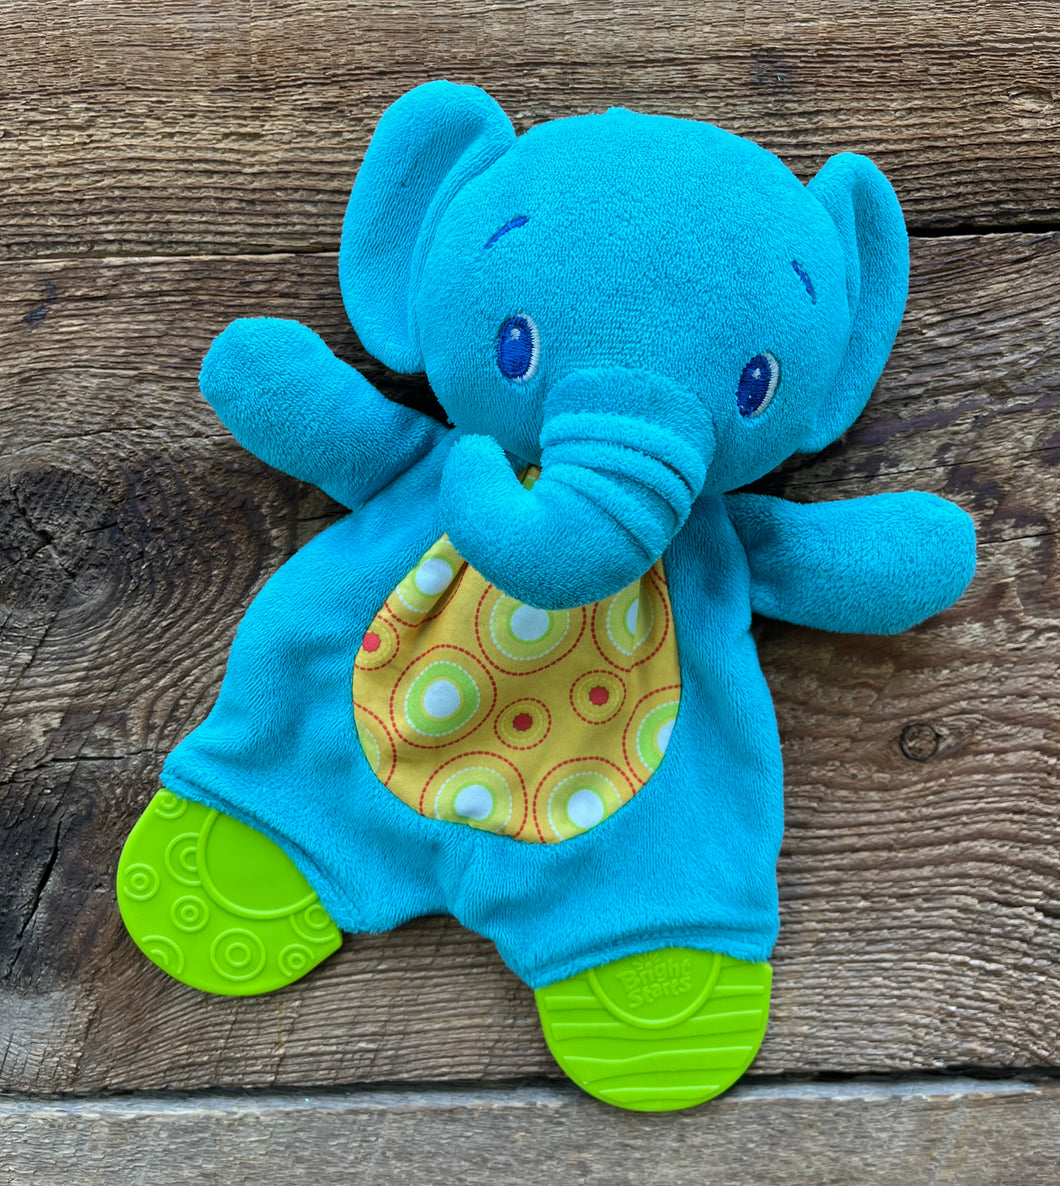 Bright Starts Elephant Teether Toy